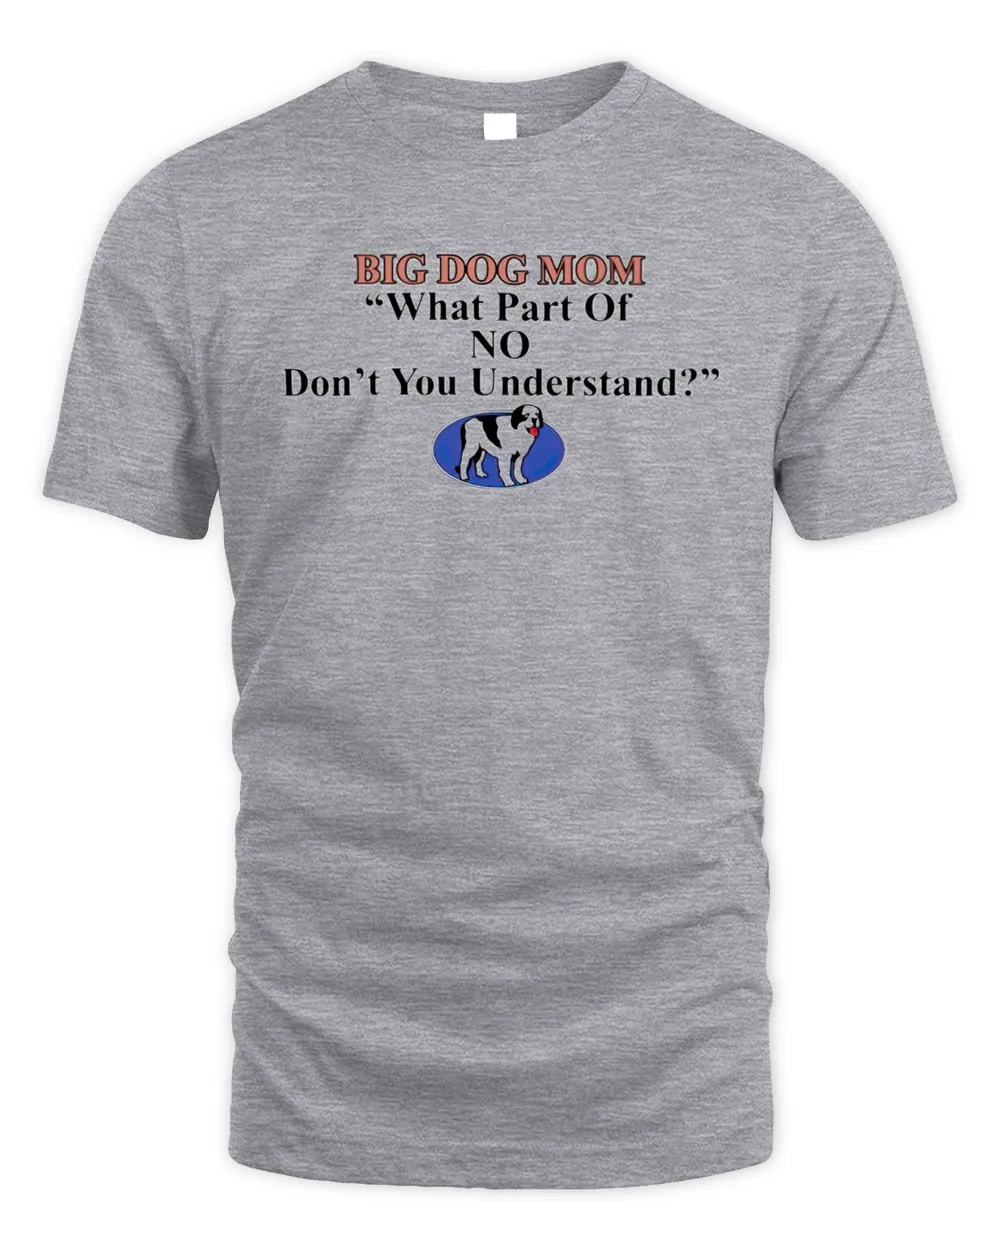 Big dog mom what part of no dont you understand shirt